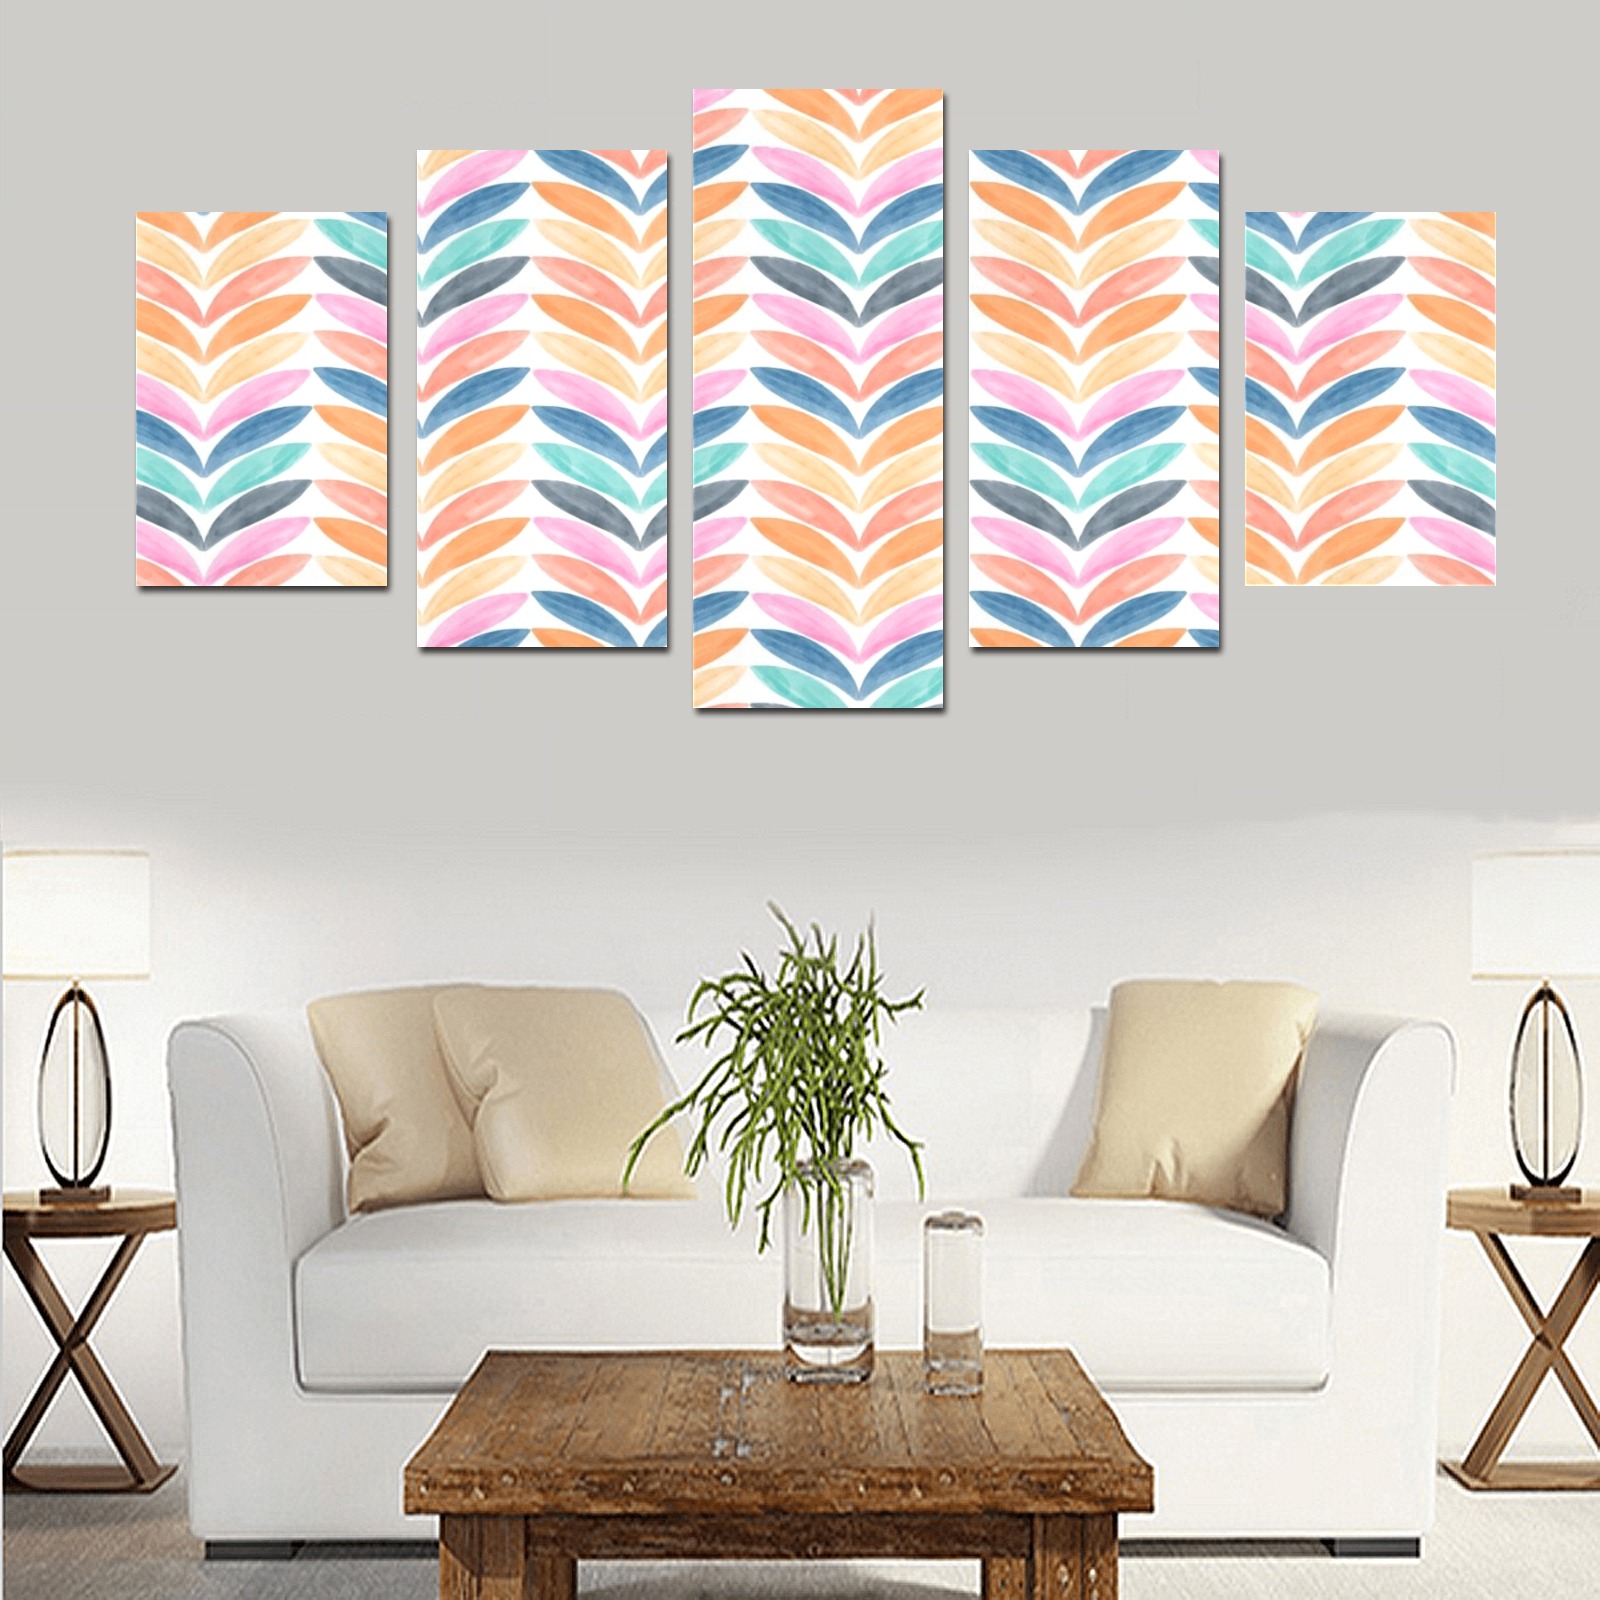 Retro Mod Abstract Leaves Canvas Print Sets D (No Frame)